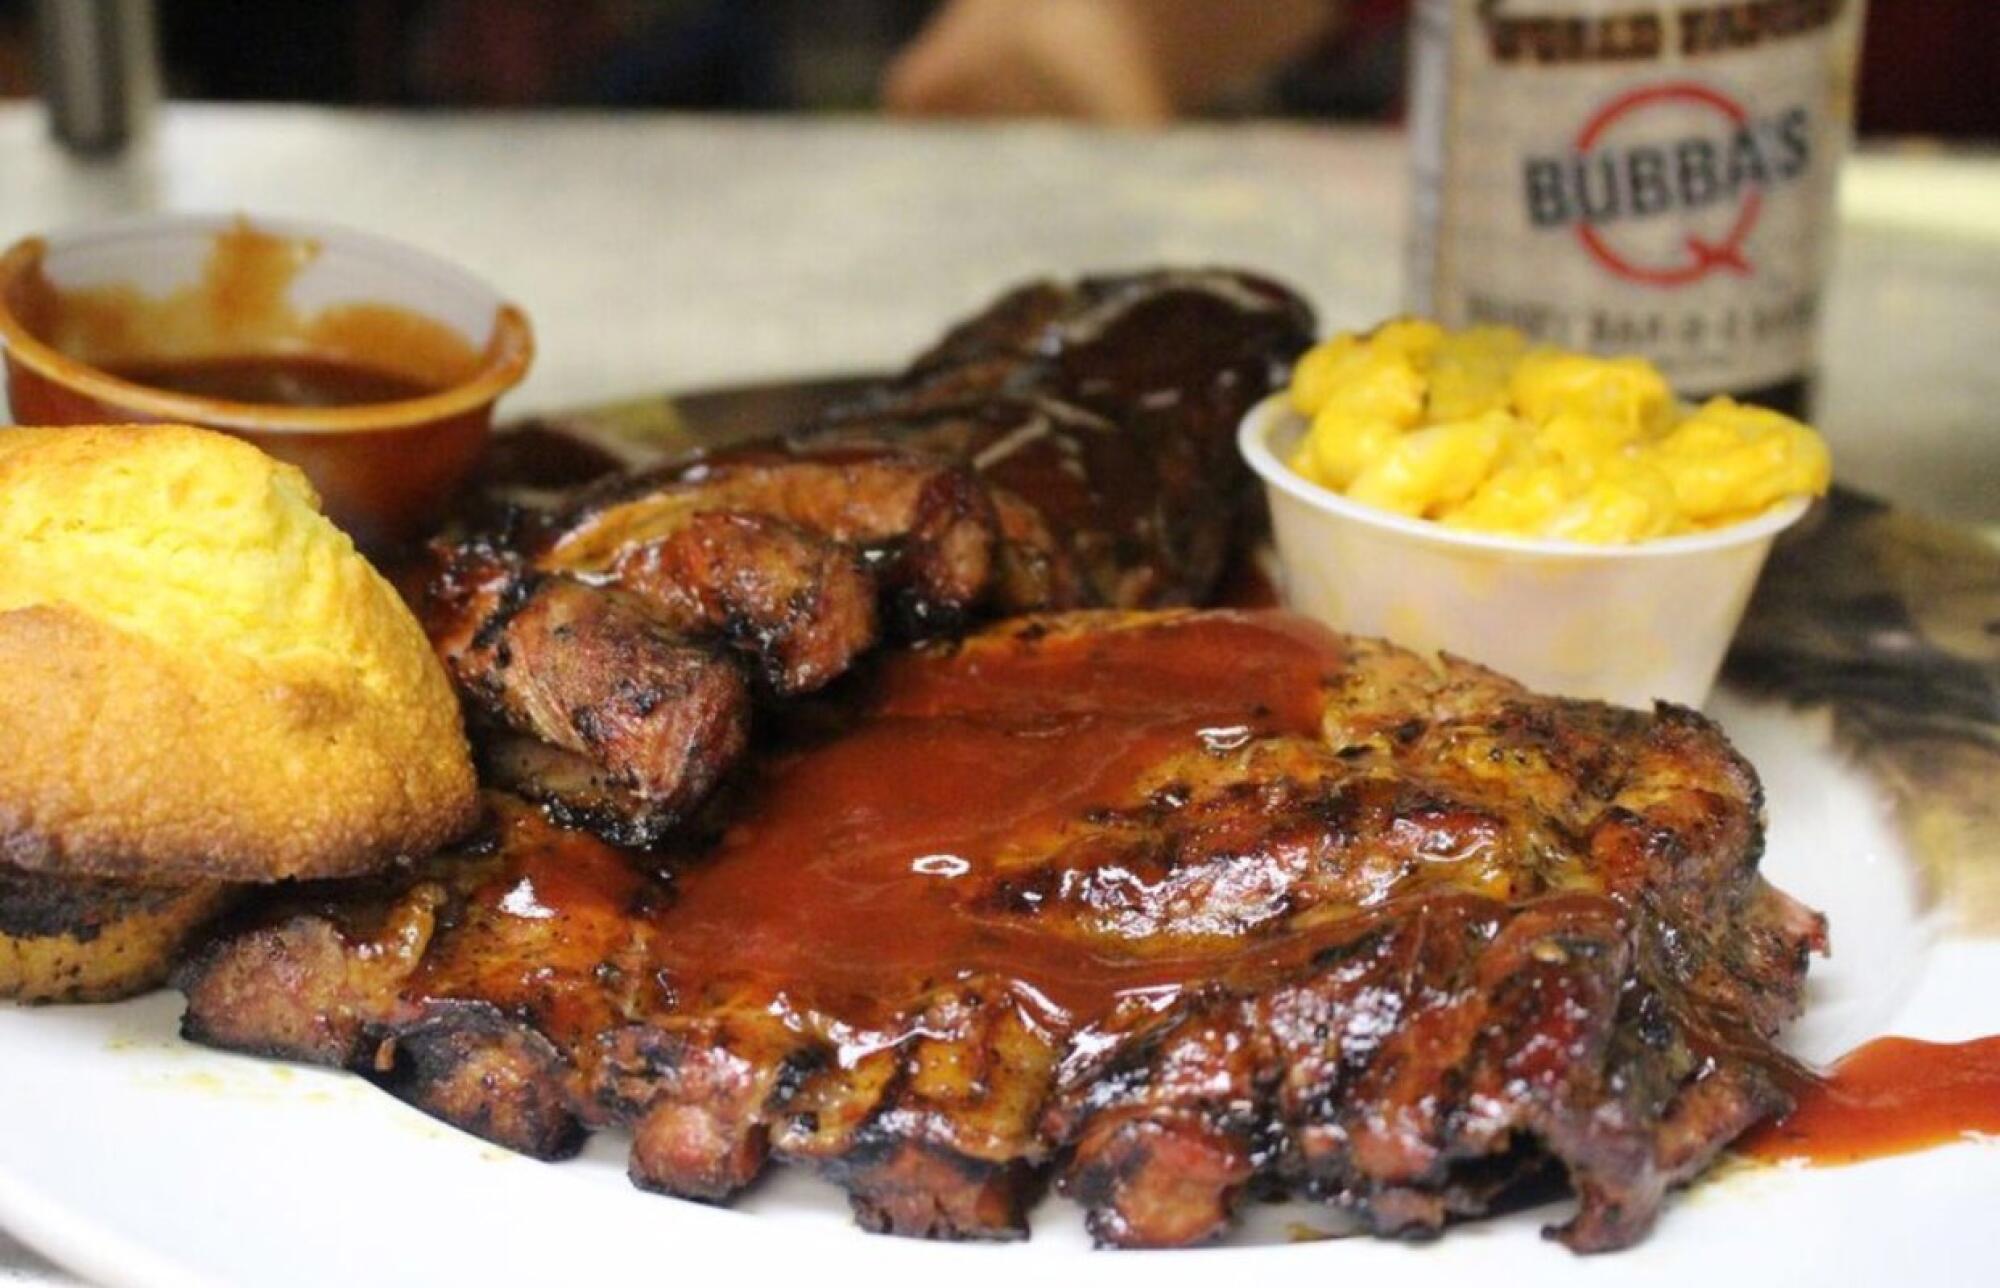 A plate of ribs with bread, mac and cheese and a cup of extra sauce on the side